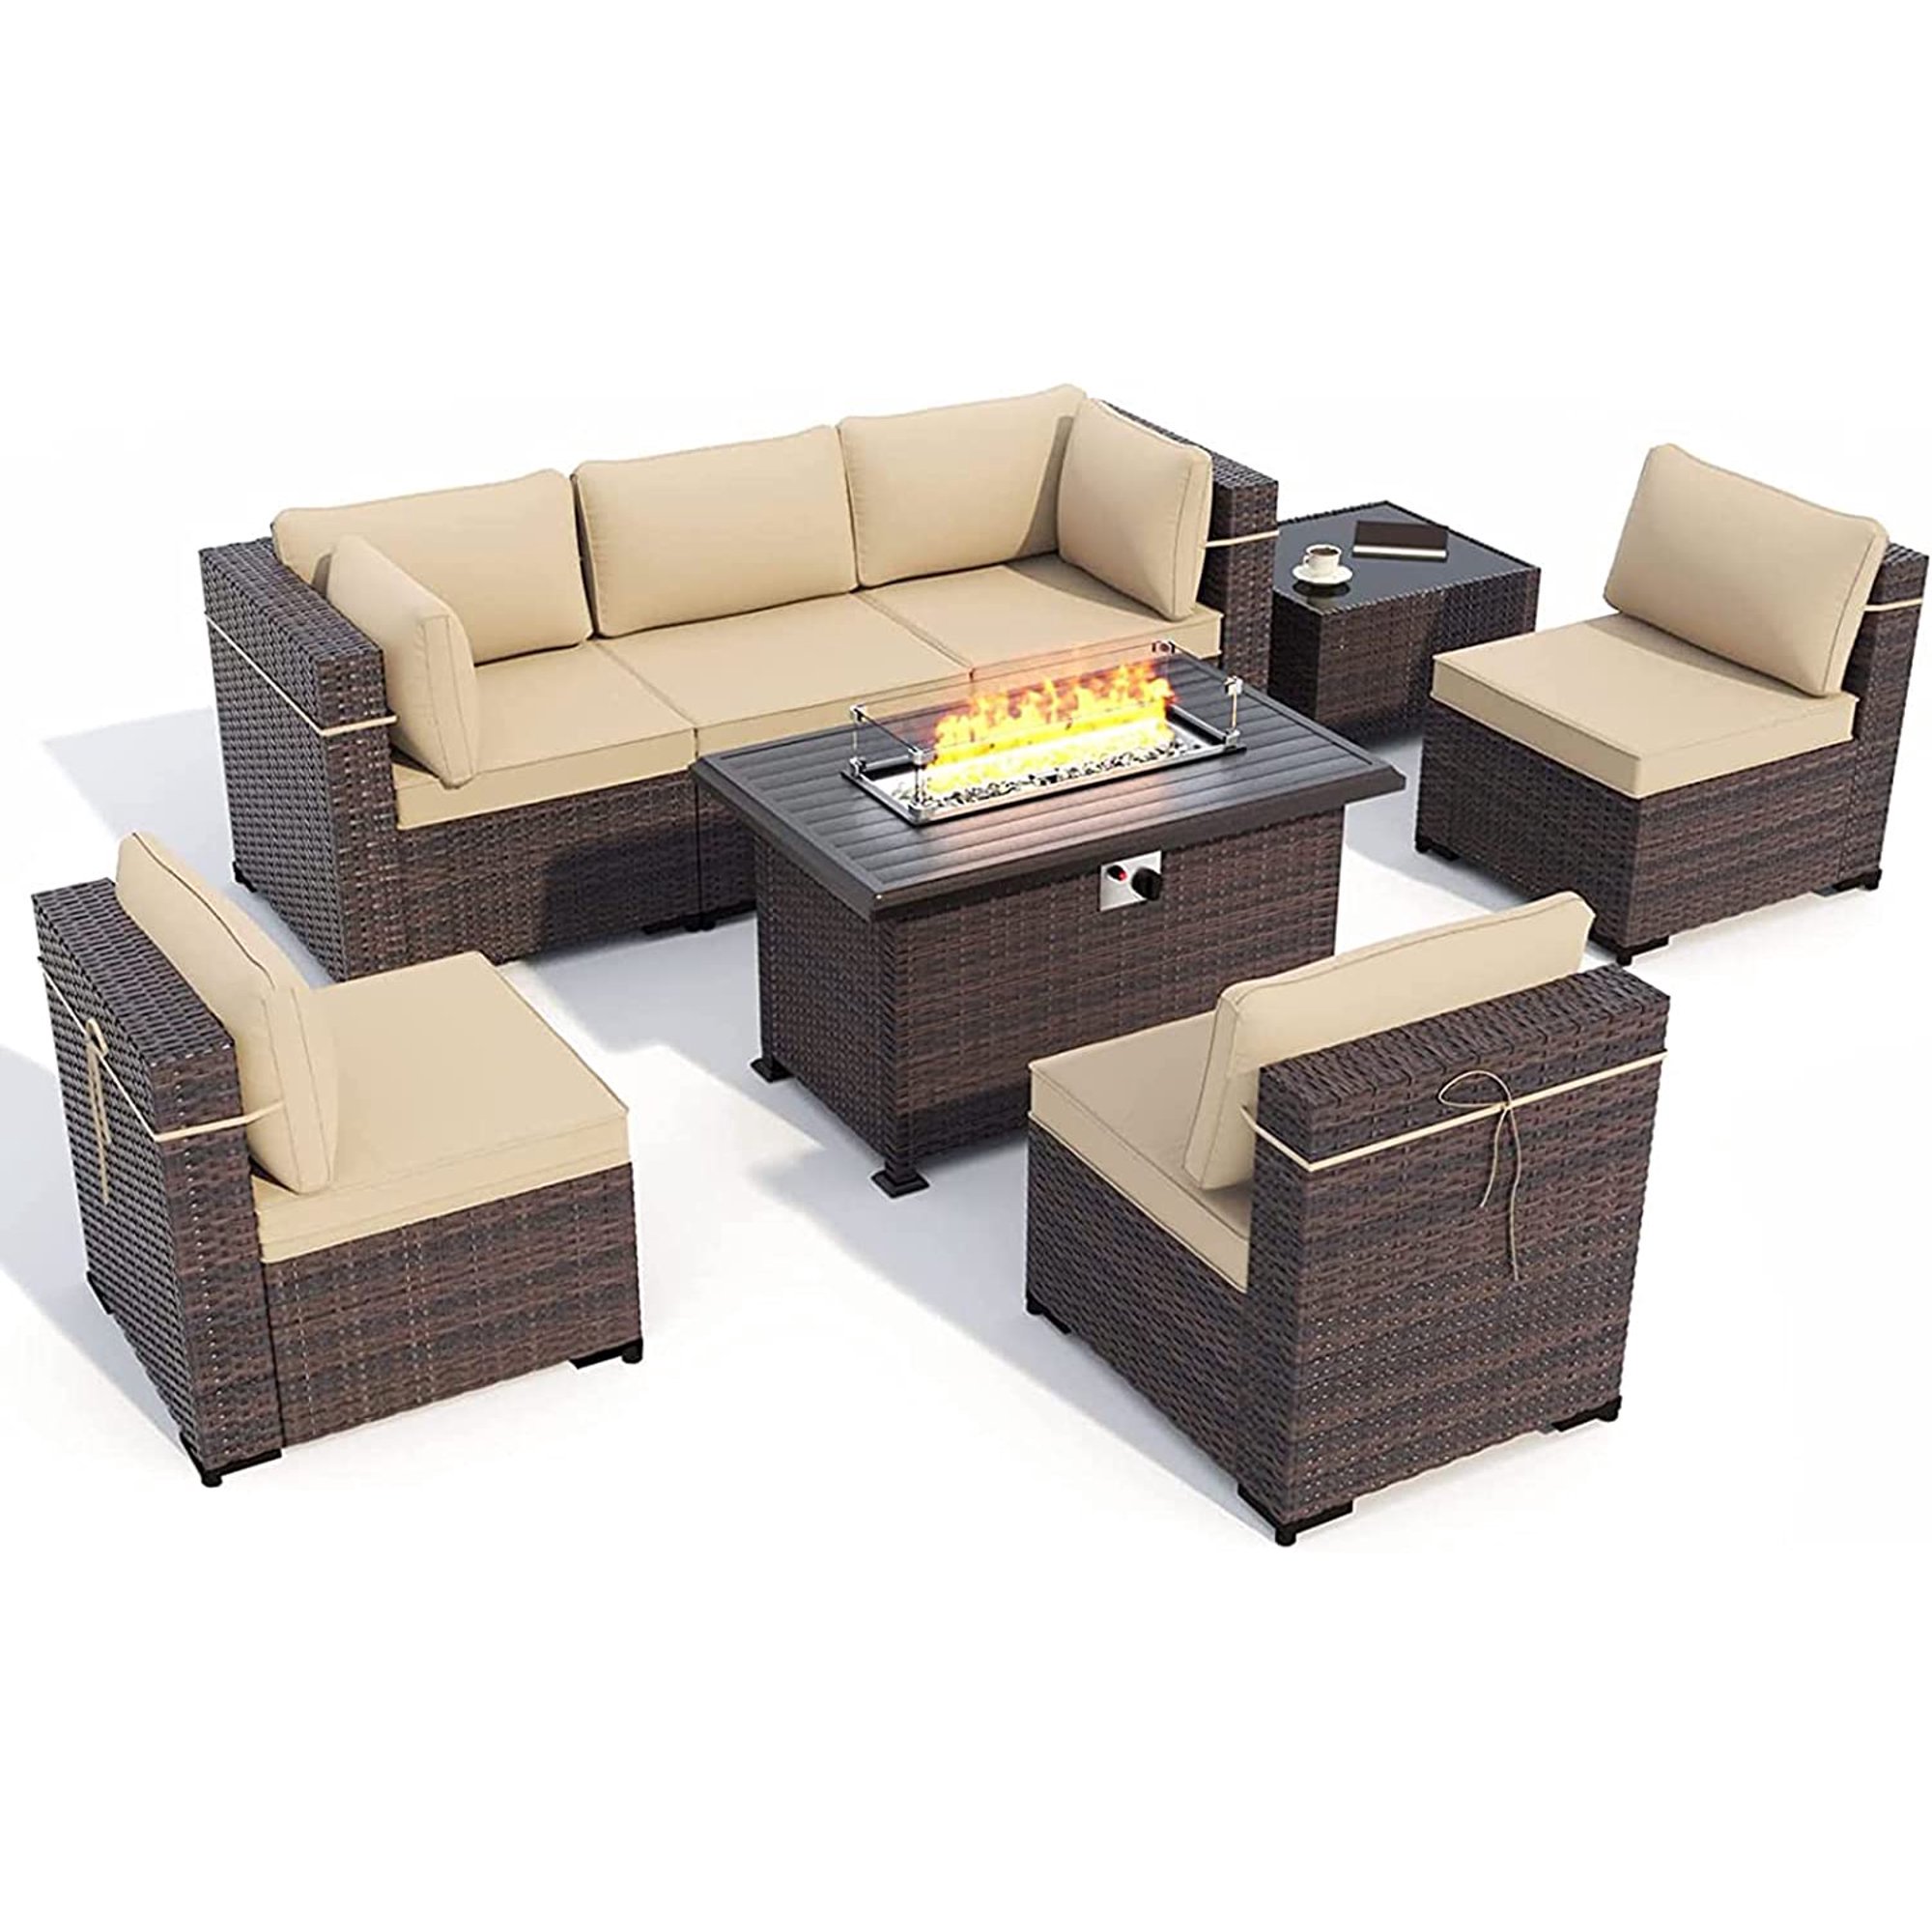 Kullavik 8 Pieces Outdoor Furniture Set with 43" Gas Propane Fire Pit Table PE Wicker Rattan Sectional Sofa Patio Conversation Sets,Sand - image 2 of 7